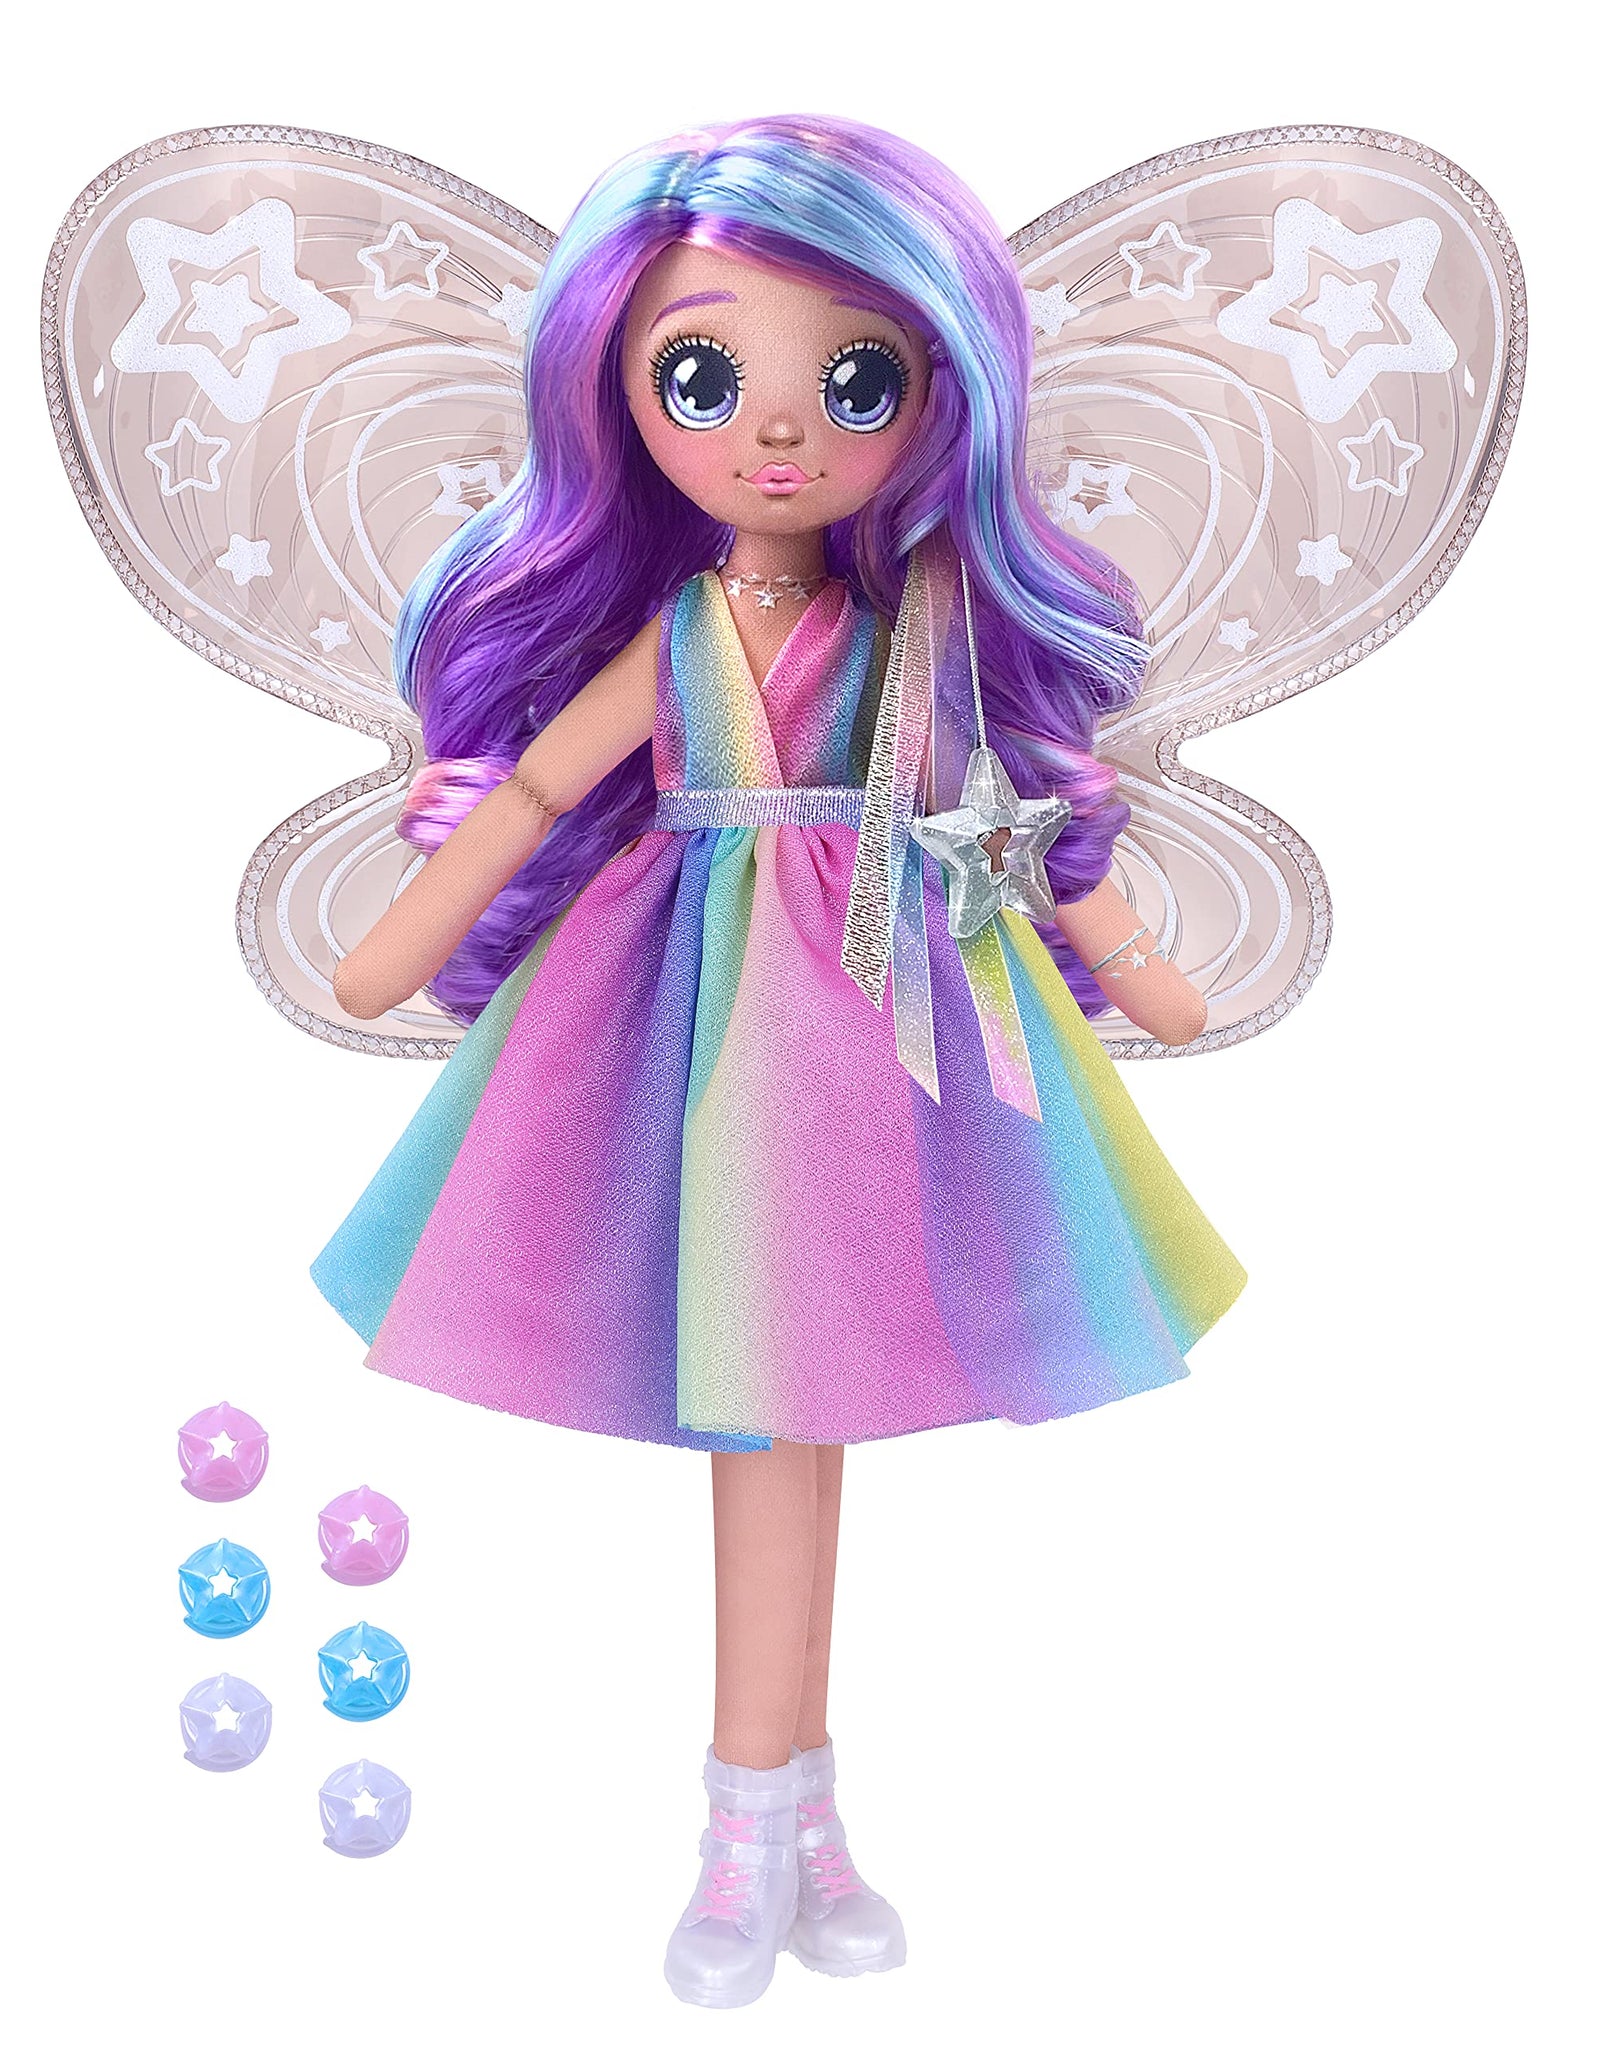 Dream Seekers Light Up Doll Pack – 1pc Toy | Magical Light Up Fairy Fashion Doll Stella, Multicolor (13827)